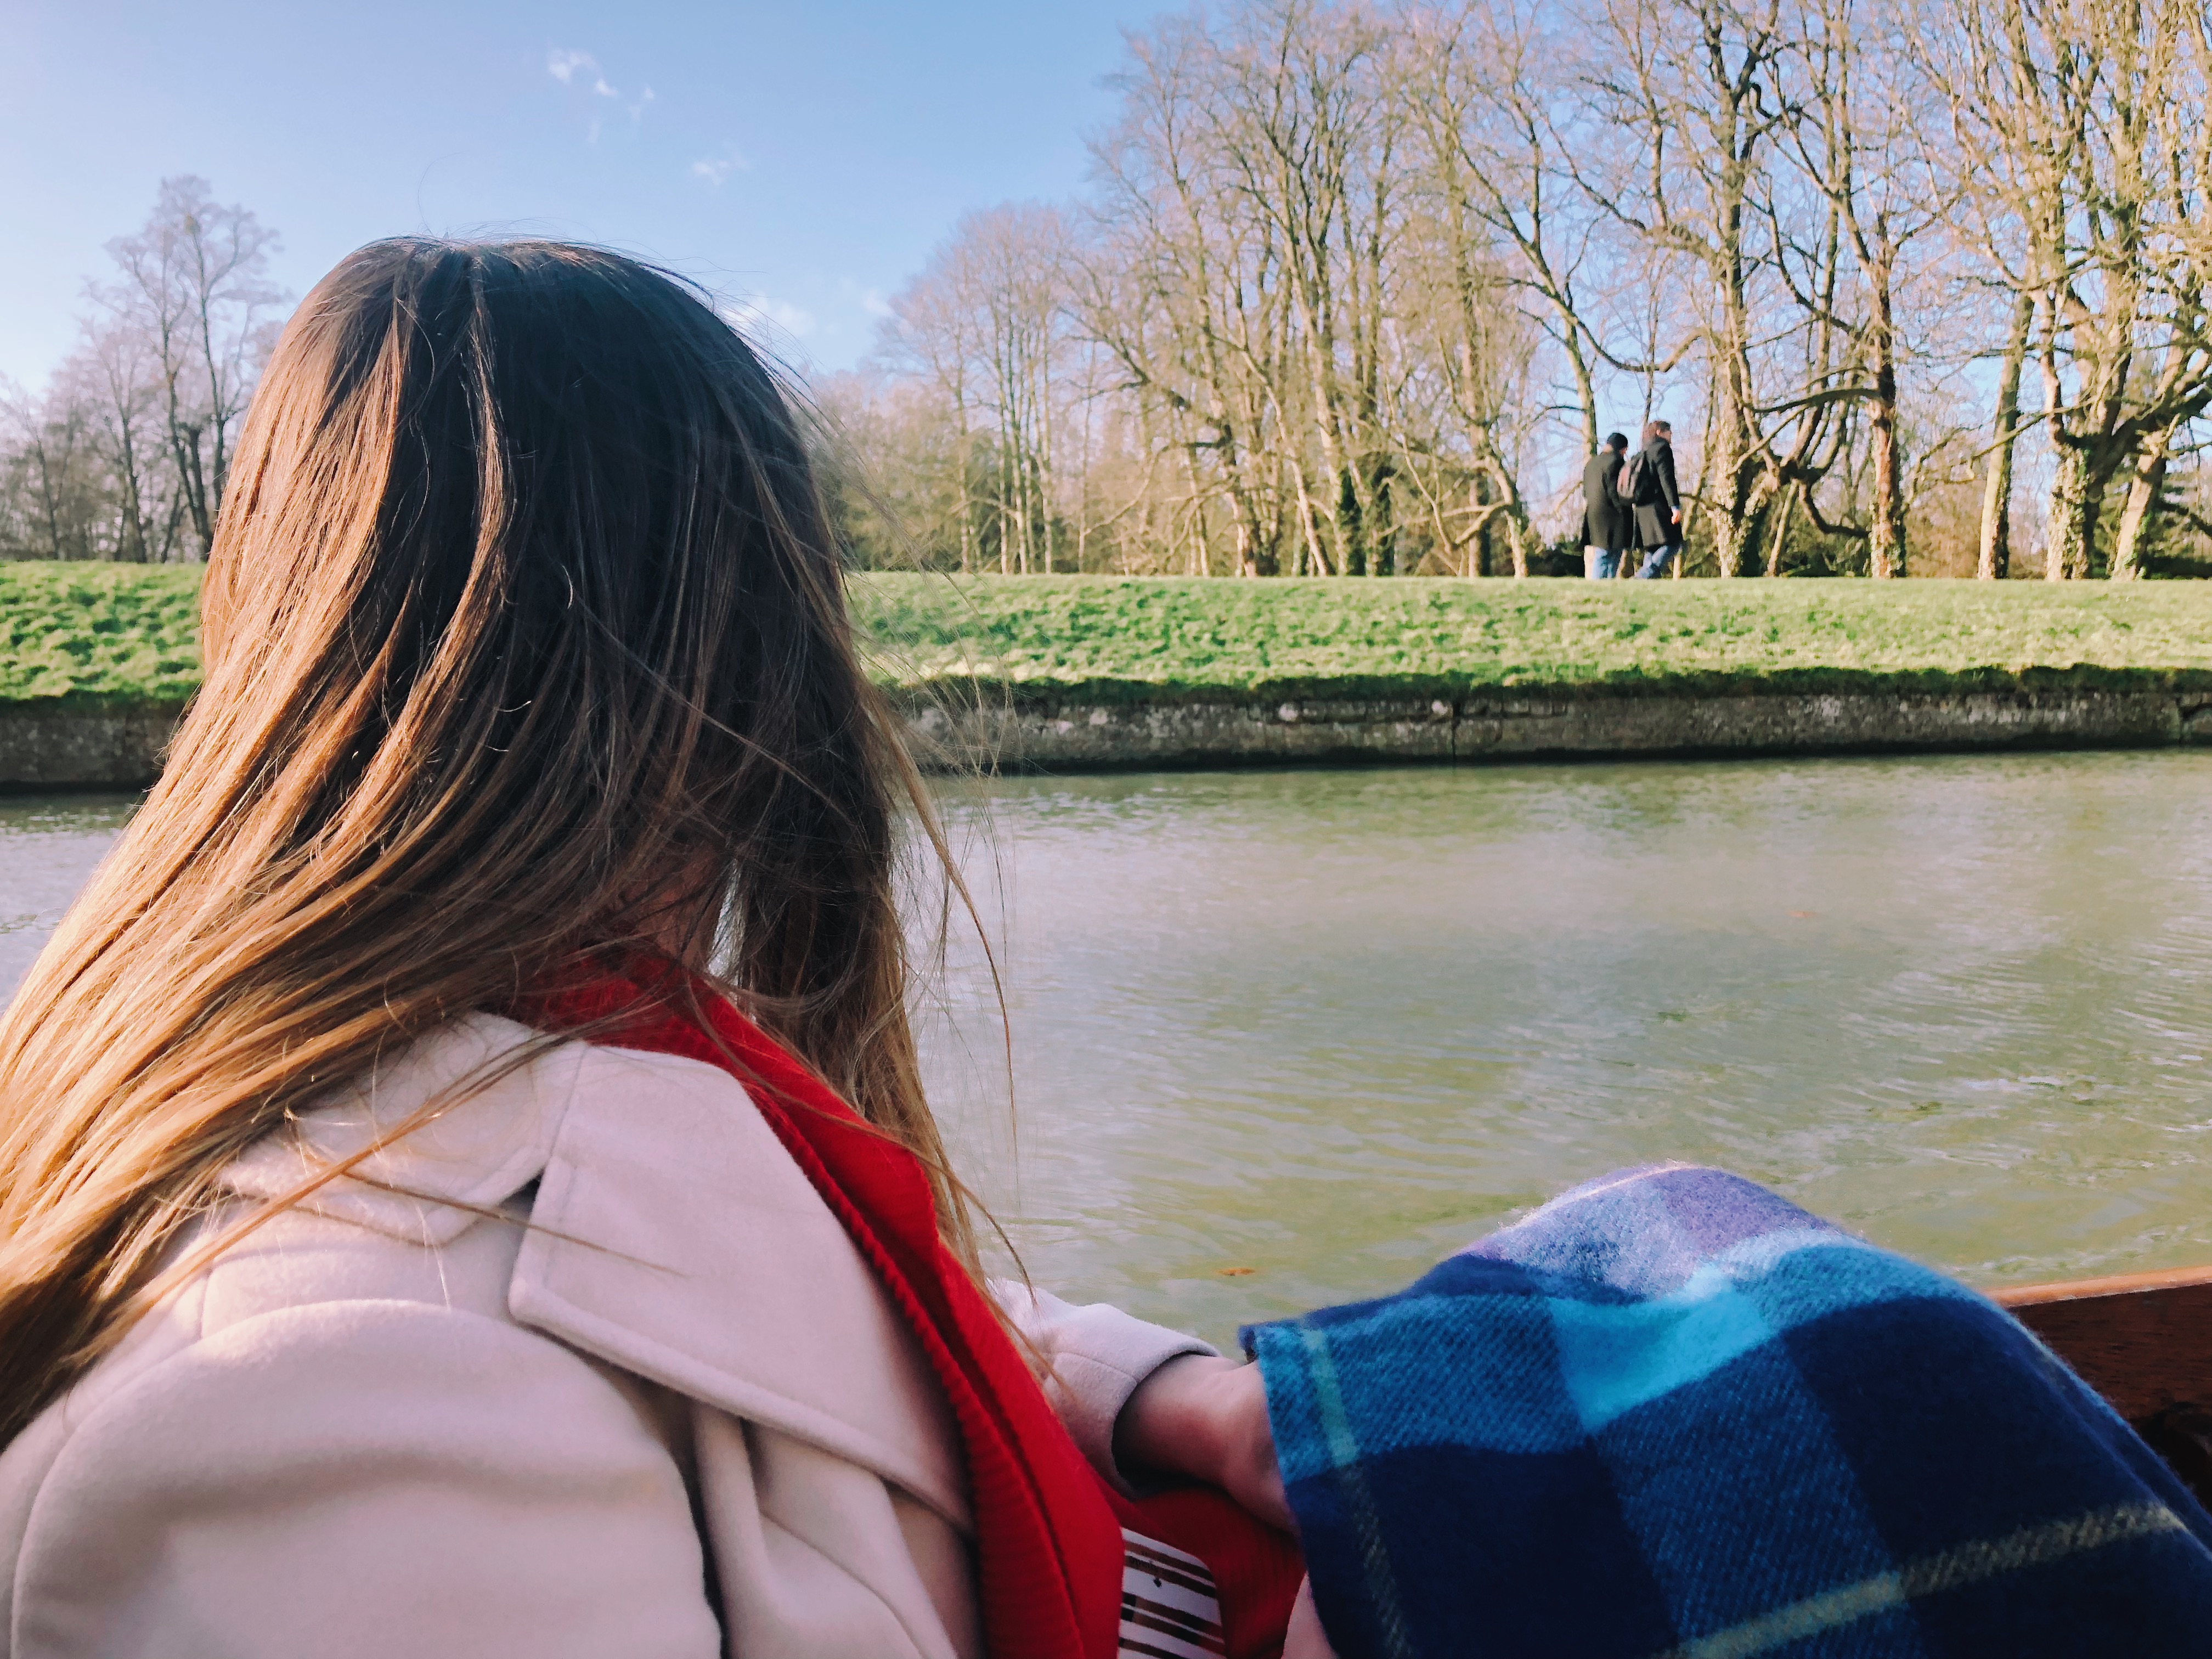 things to see in cambridge - punting tour